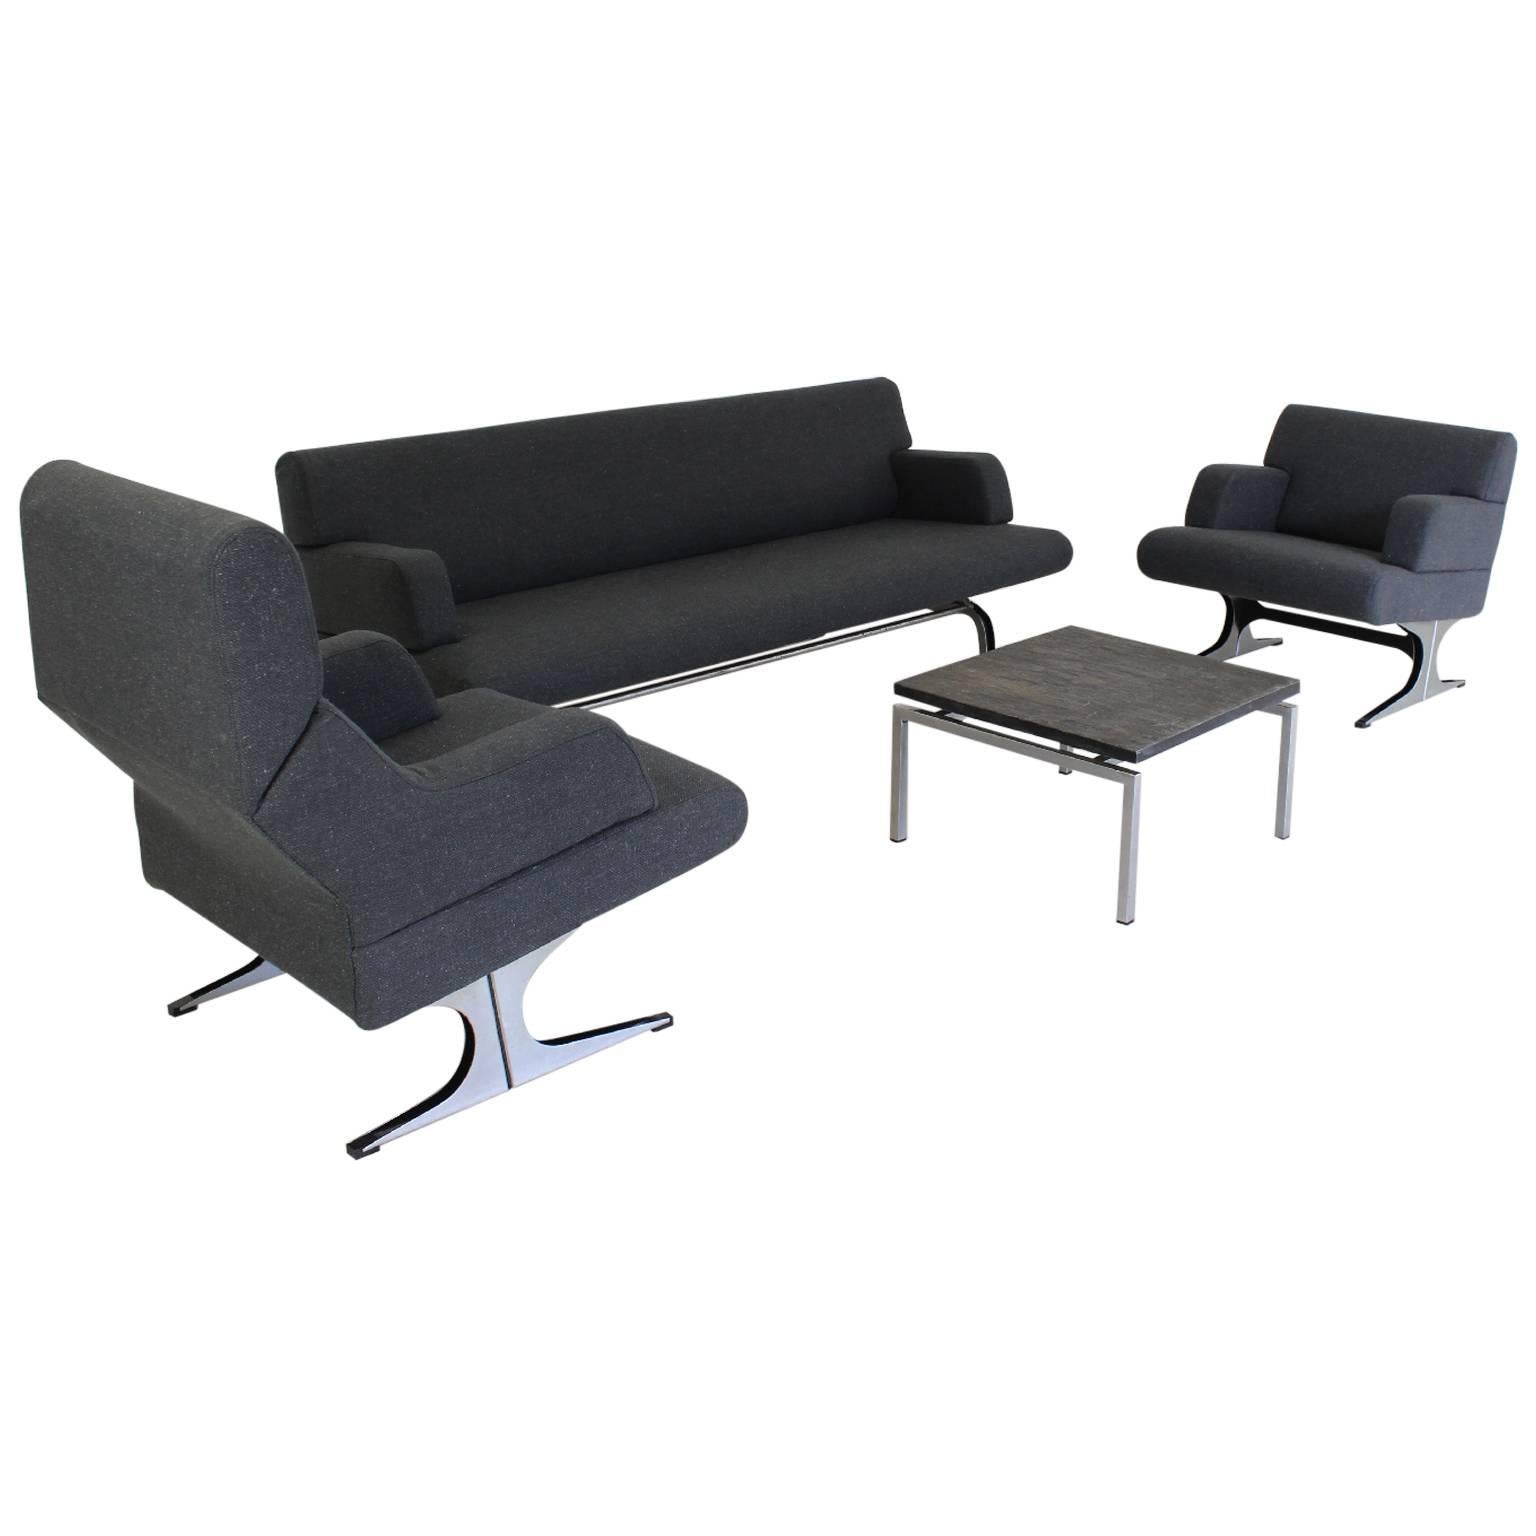 Dutch Design Lounge Living Room Set with Sit Sleep Couch by Martin Visser For Sale